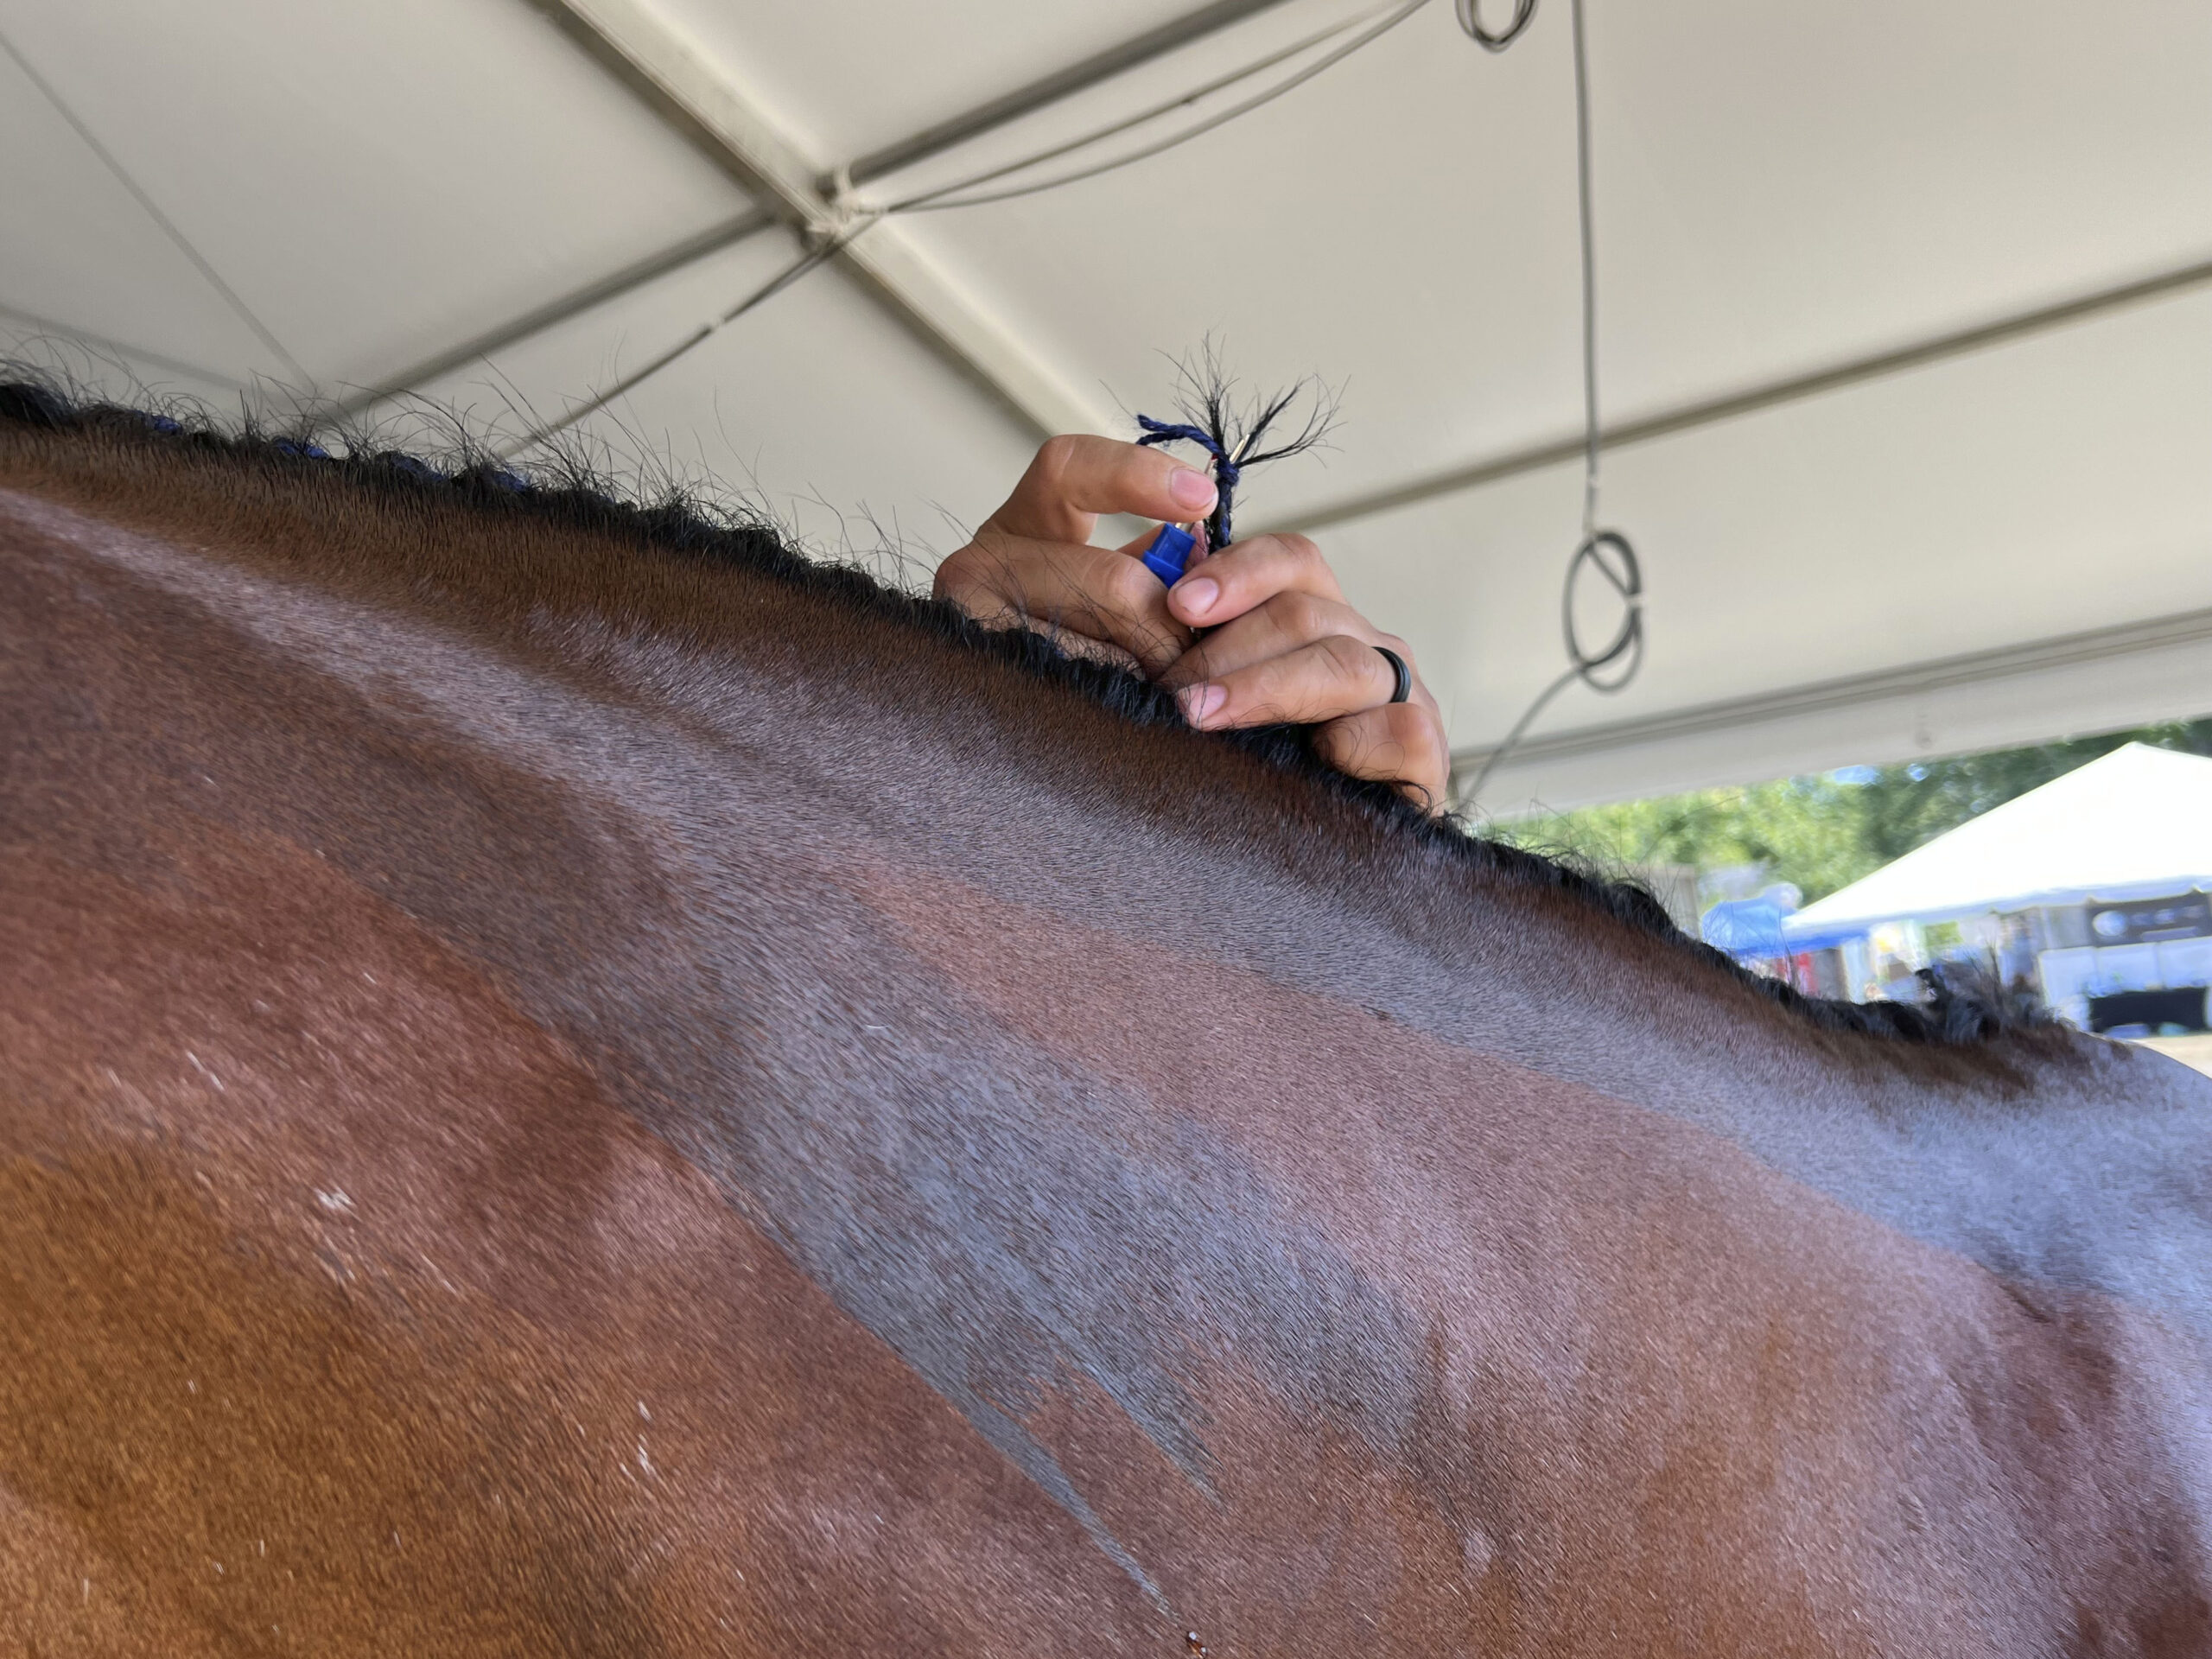 Graciano Mayo takes out Cheeky's mane braids at the Hampton Classic Horse Show on Sunday.  DANA SHAW